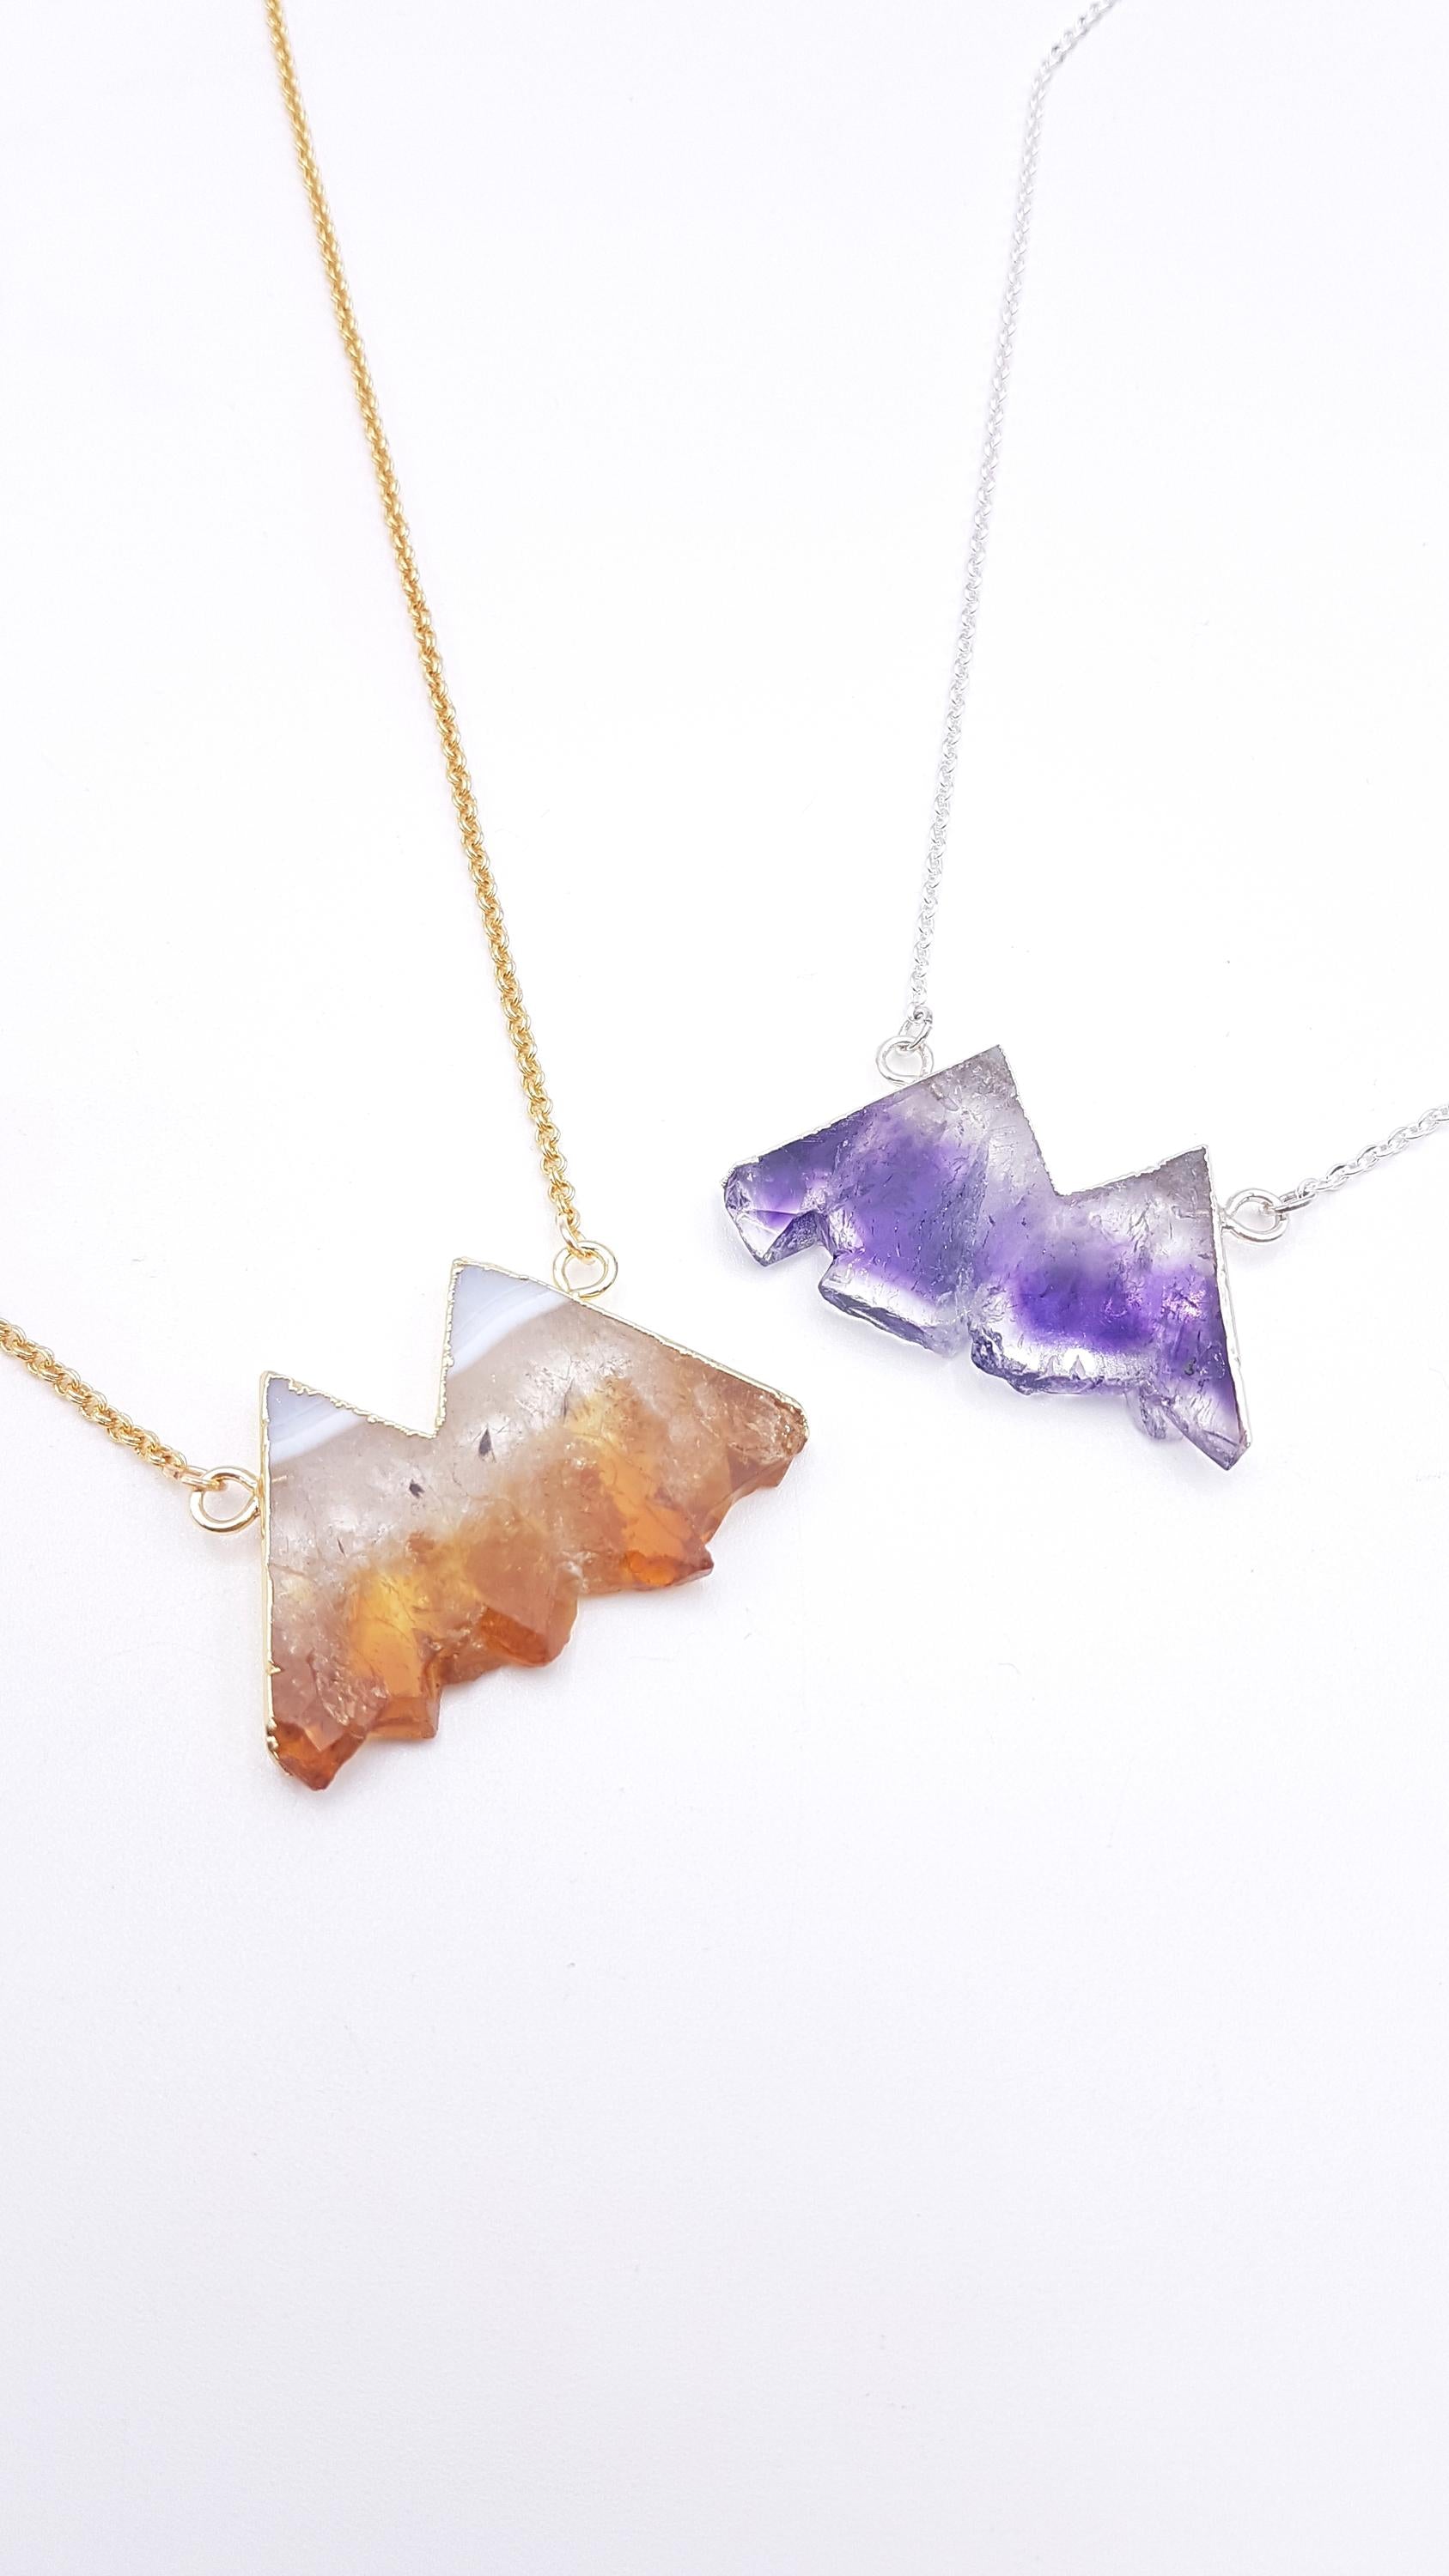 Take Me to the Mountains Necklace -  Amethyst